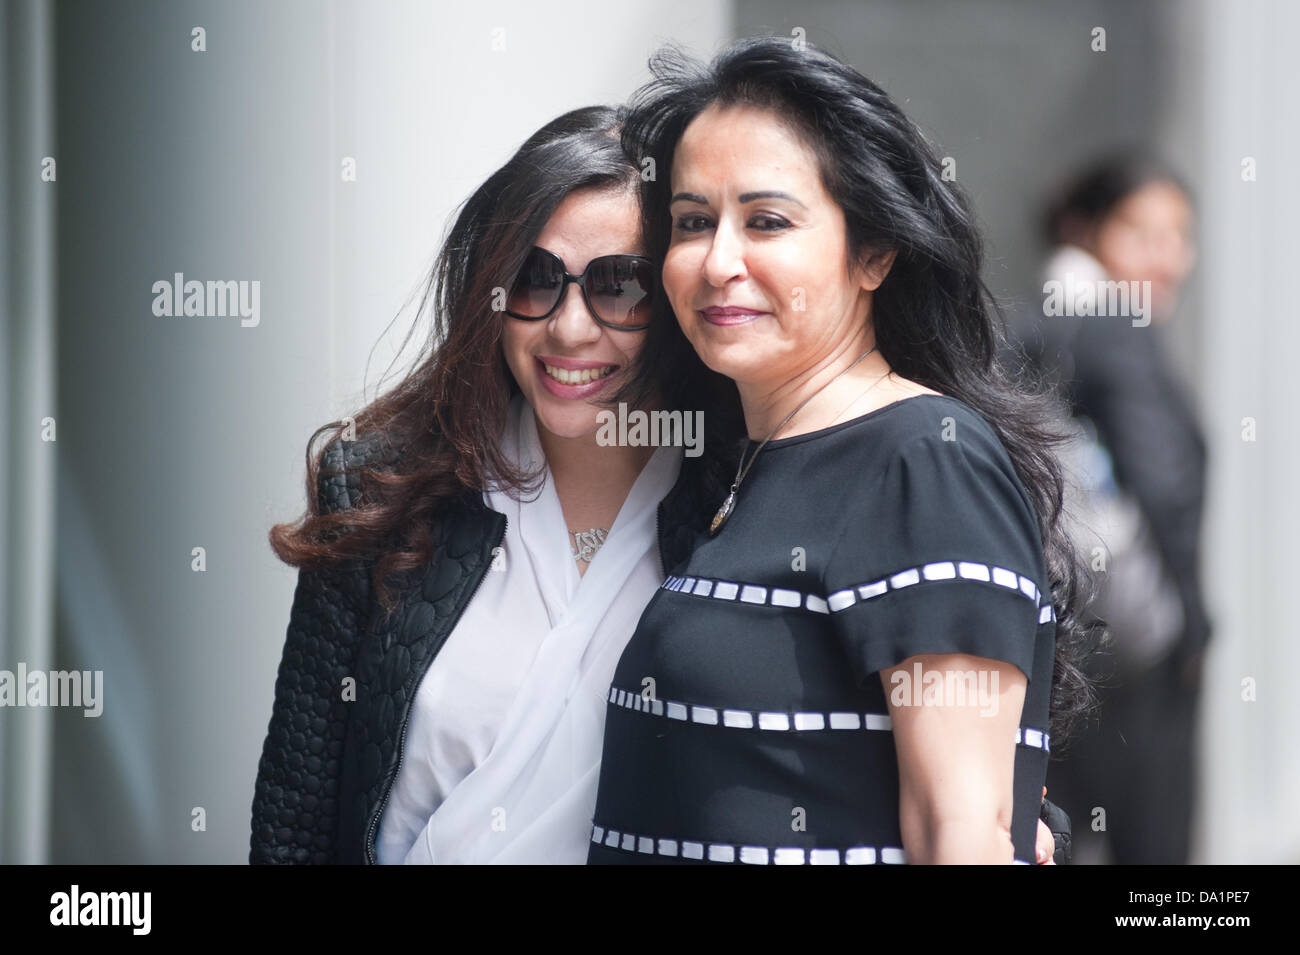 London, UK - 1 July 2013: Consultant Daad Sharab poses for a picture with her daughter outside the High Court. She claims  Saudi Prince Al-Waleed Bin Talal Bin Abdul-Aziz Al-Saud owes her around £6.5 million commission for the part she played in a 2005 Airbus deal. Prince Al-Waleed disputes her claim and denies that any agreement was made for a 'specific commission'. Credit:  Piero Cruciatti/Alamy Live News Stock Photo